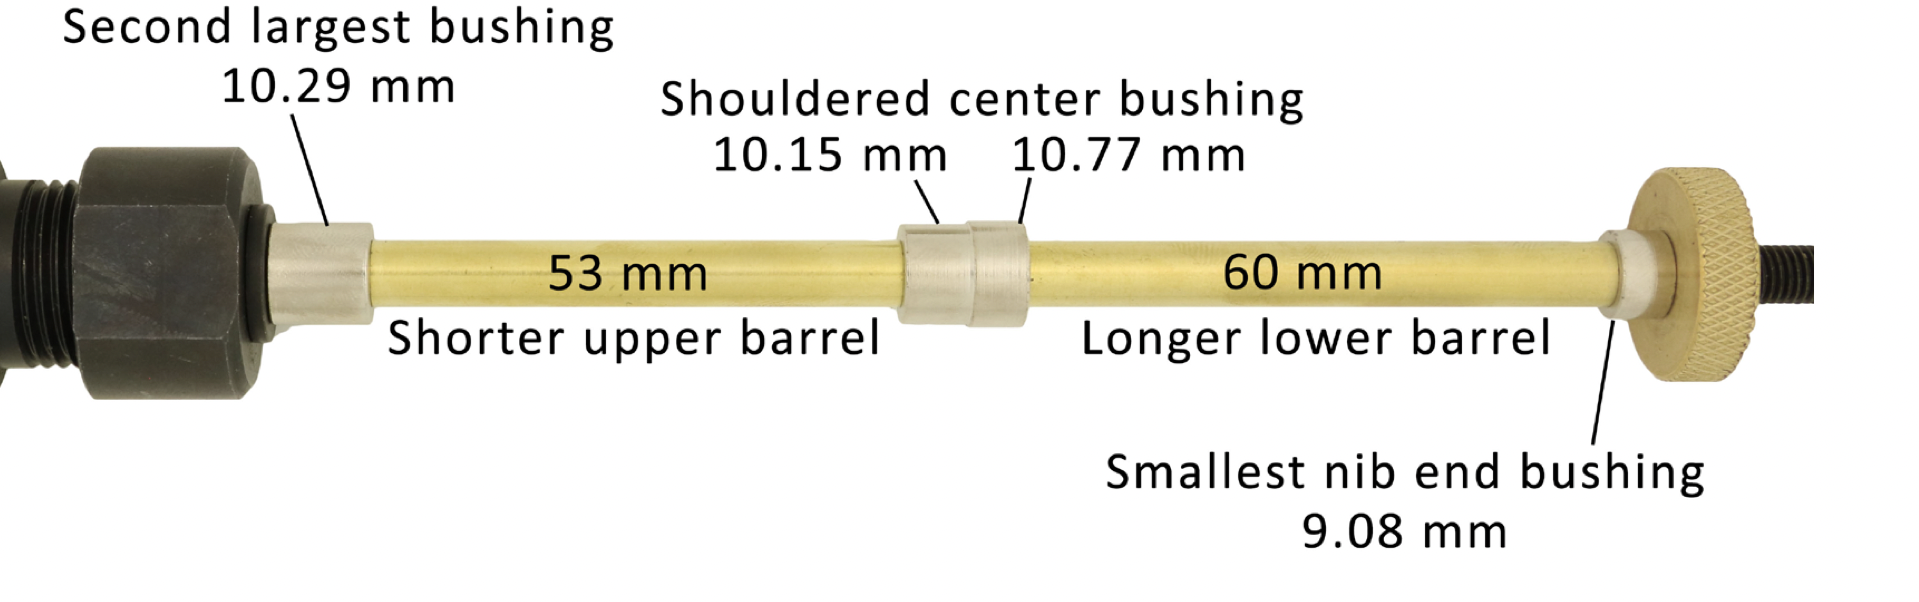 Brass Budget Round Top European pen tubes assembled on lathe in between 107A Bushings and brass nut from William Wood-Write Ltd.